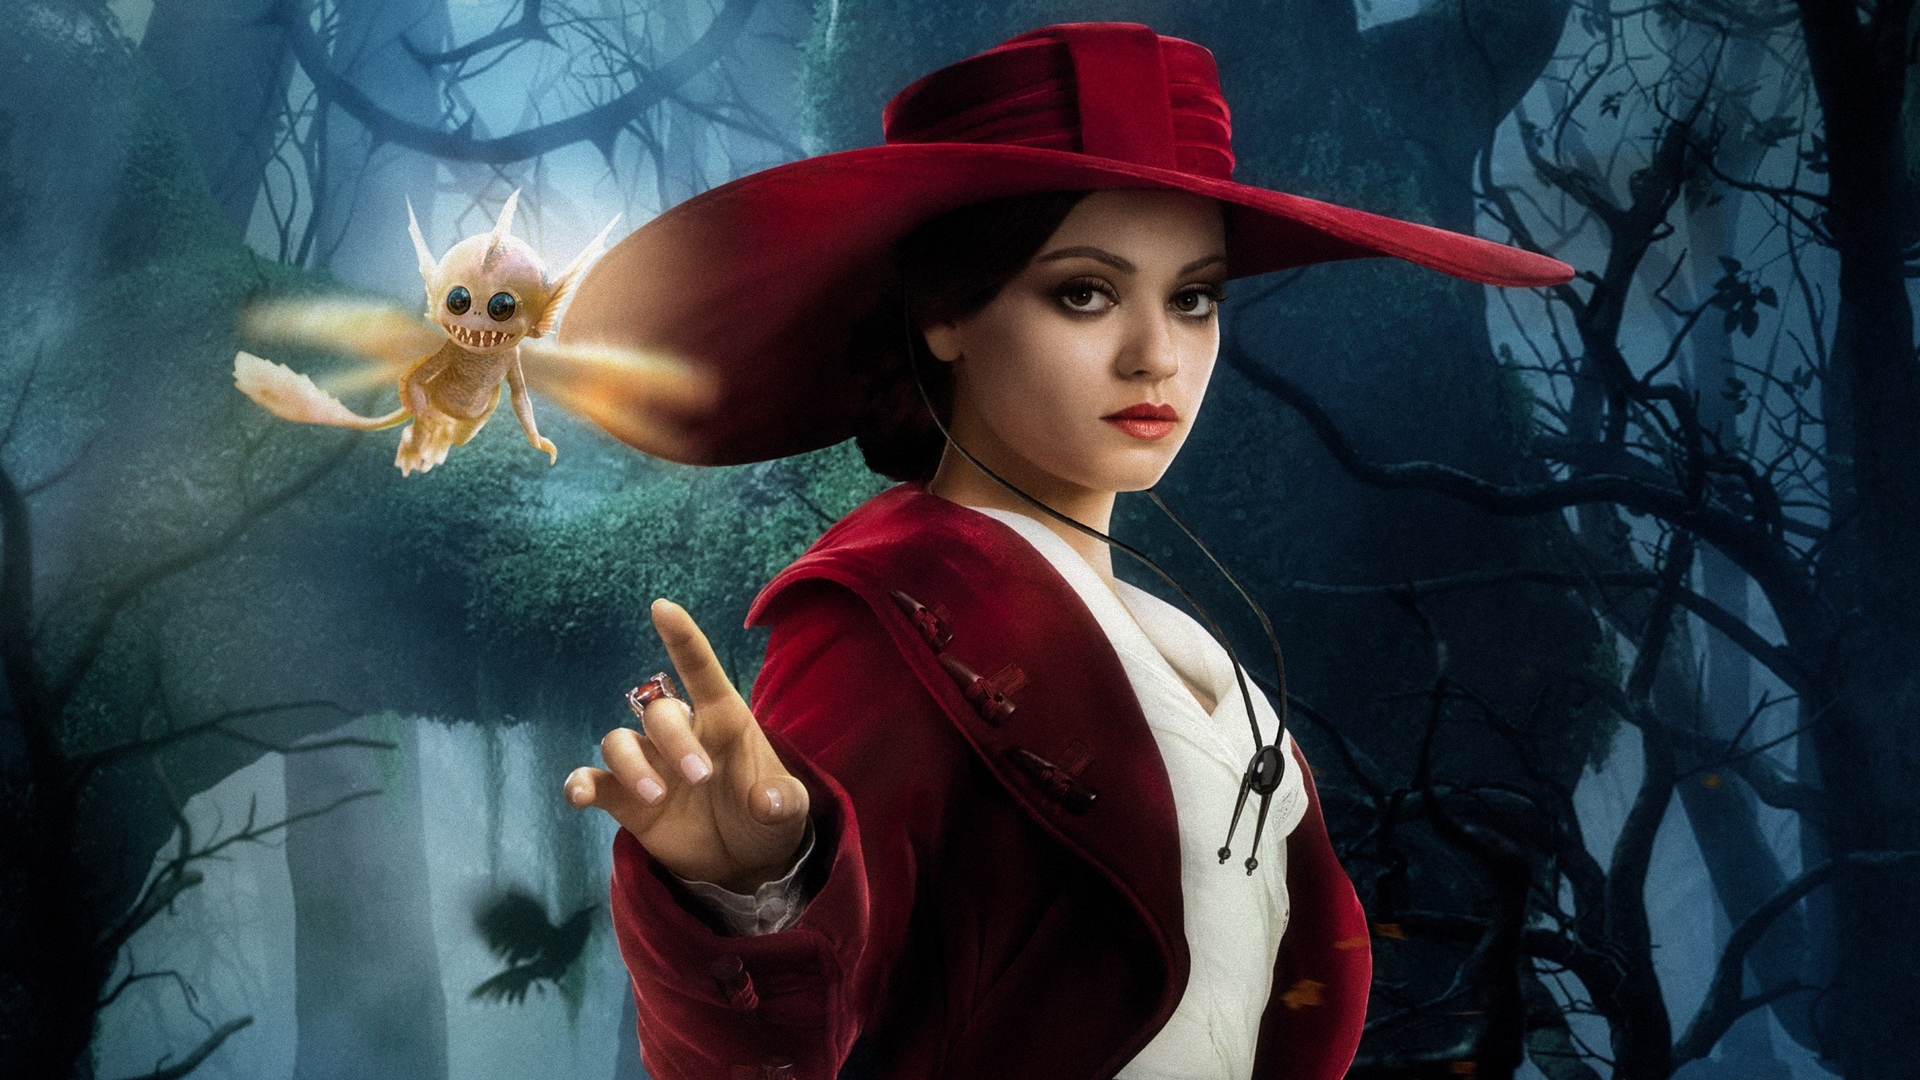 Vibrant, stunning HD desktop wallpaper featuring the movie Oz the Great and Powerful.